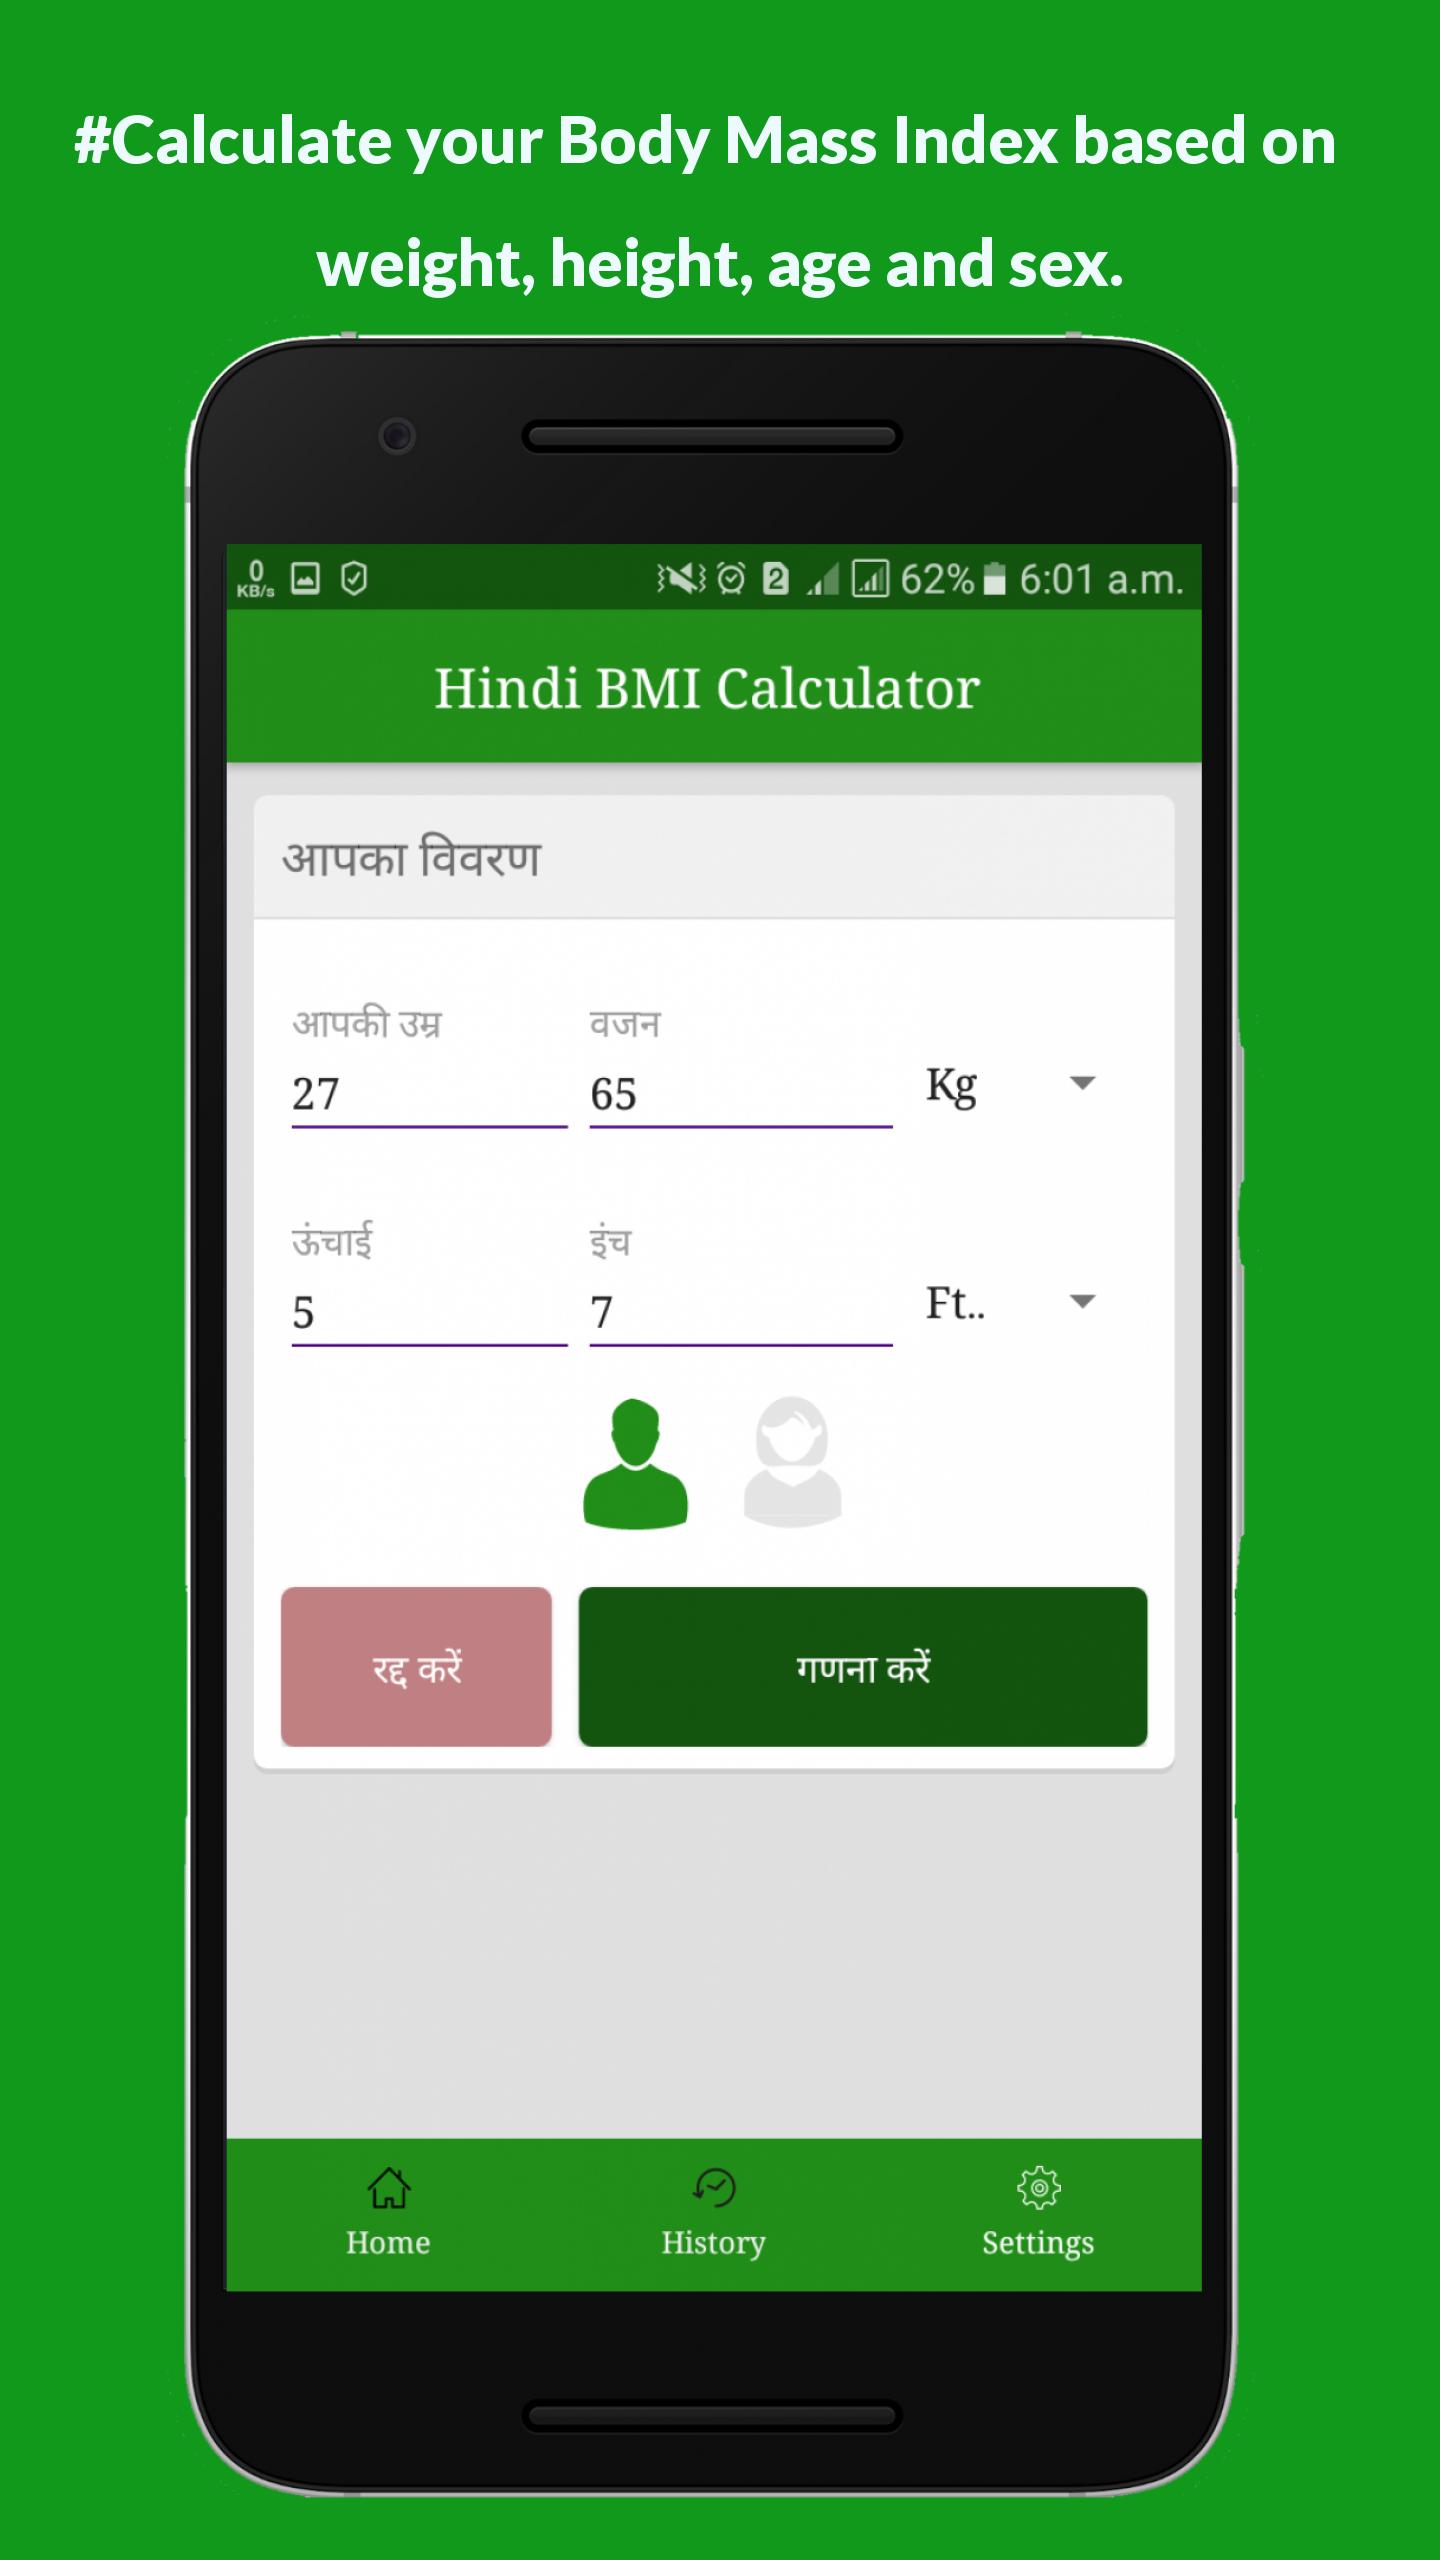 Indian Bmi Calculator Hindi For Android Apk Download